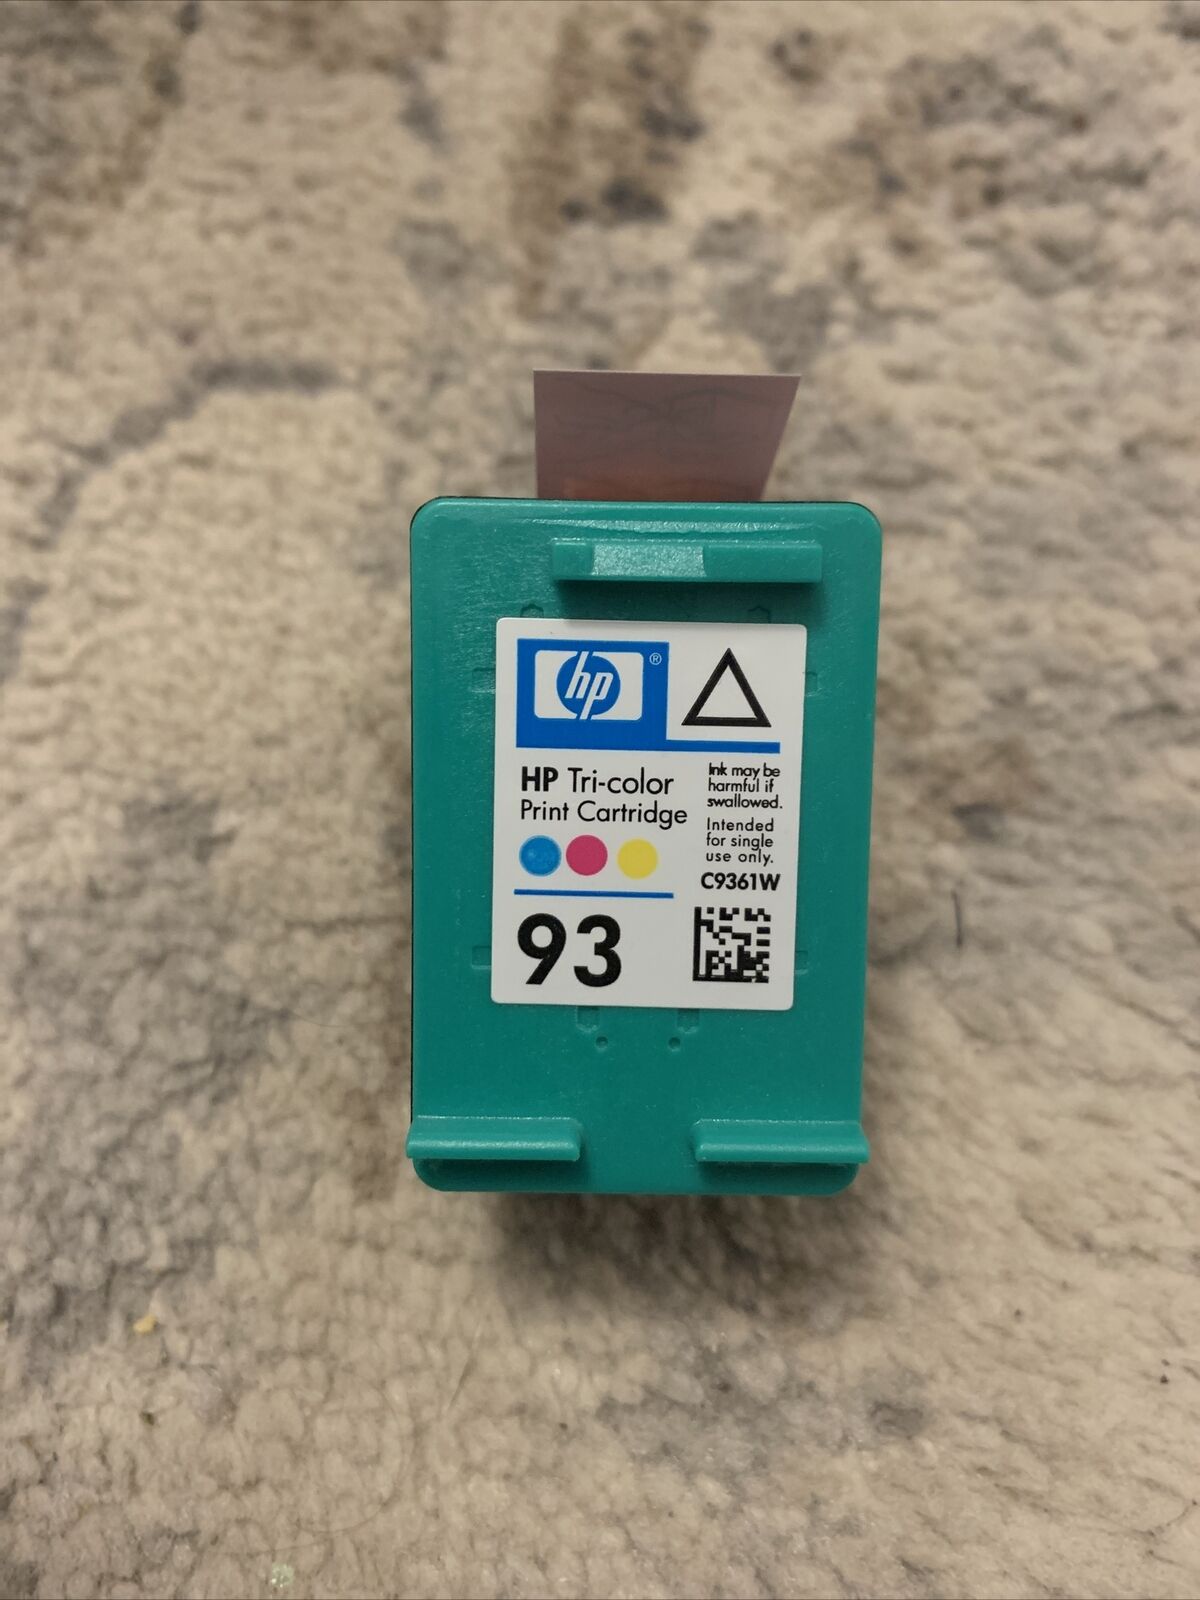 HP 93 Tri Color Ink Cartridge single-Pack, New open box Exp 06/09/08